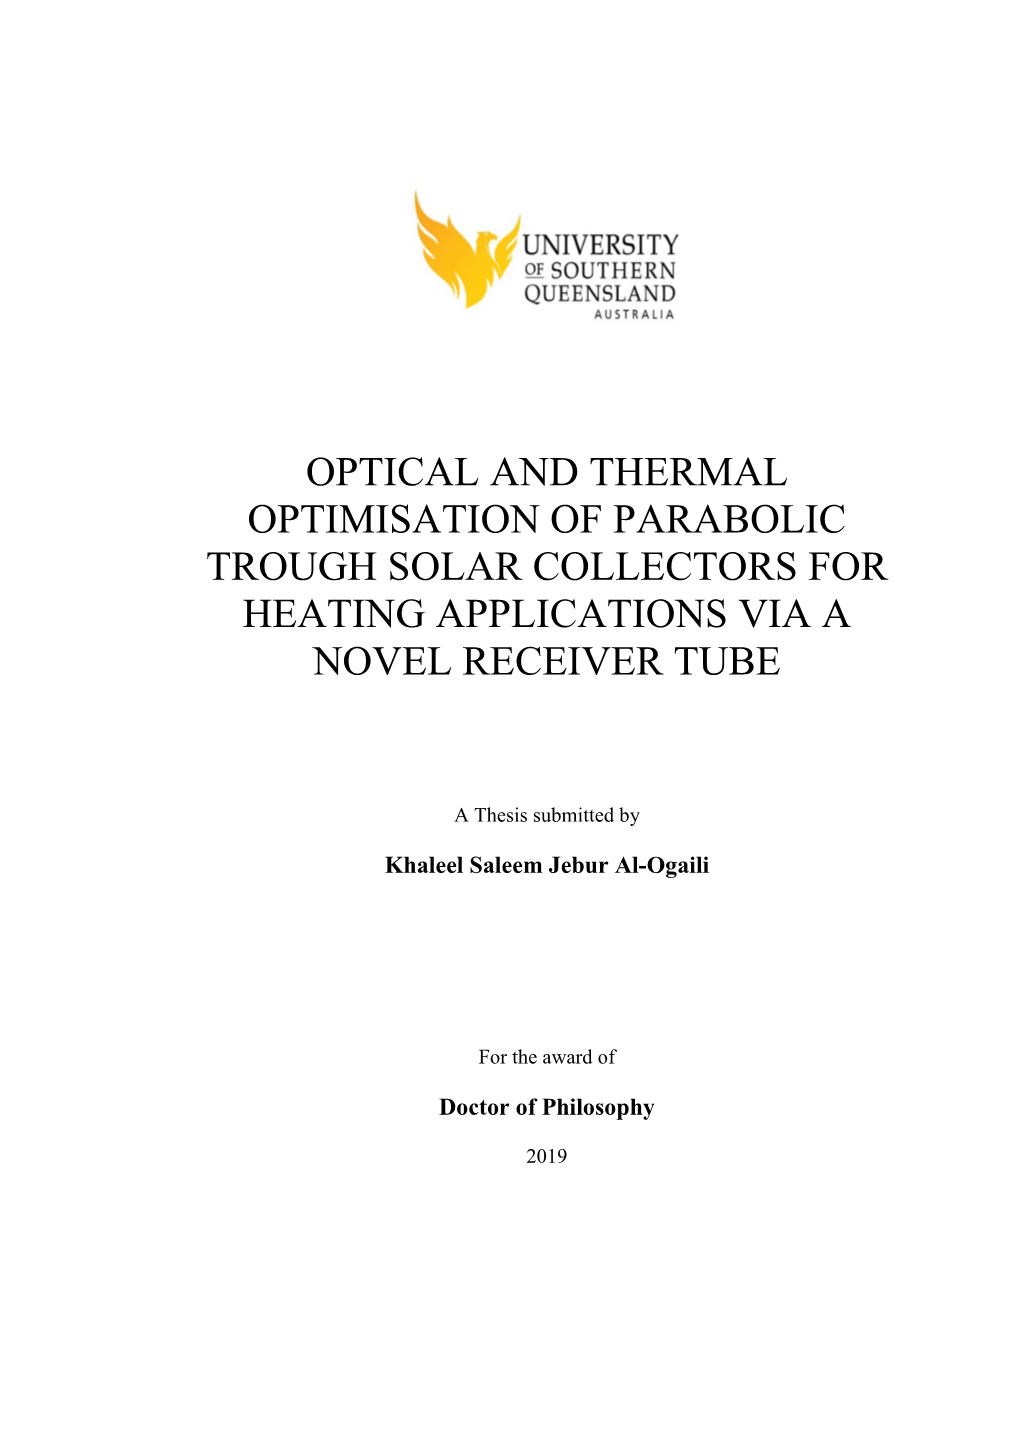 Optical and Thermal Optimisation of Parabolic Trough Solar Collectors for Heating Applications Via a Novel Receiver Tube